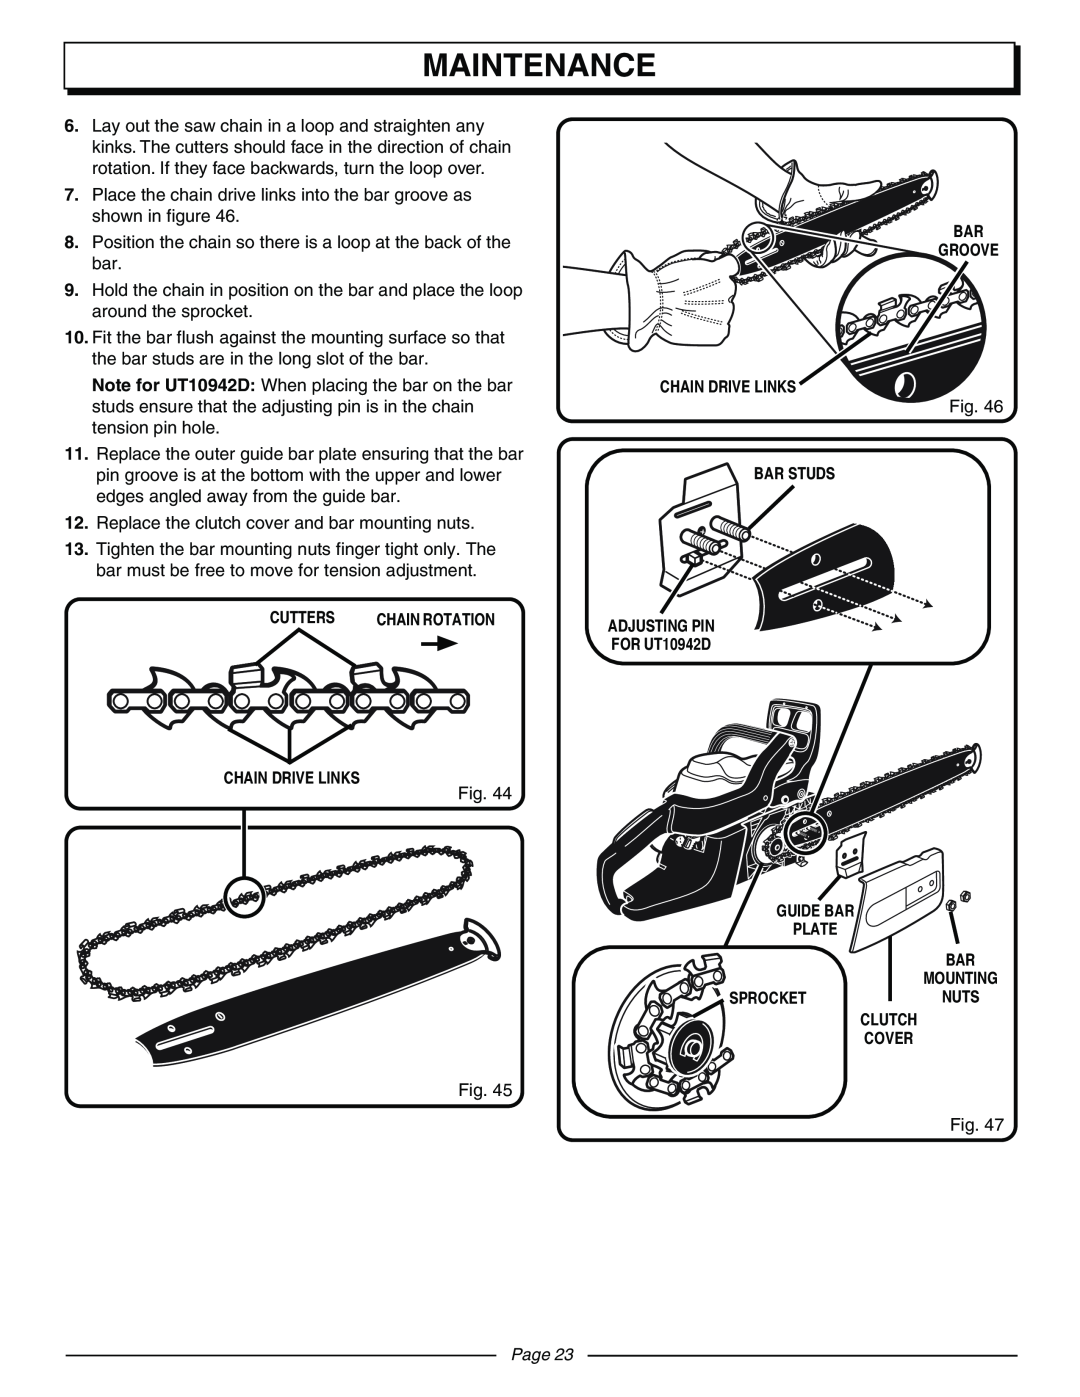 Homelite UT10942D manual Maintenance, Replace the clutch cover and bar mounting nuts, Page 